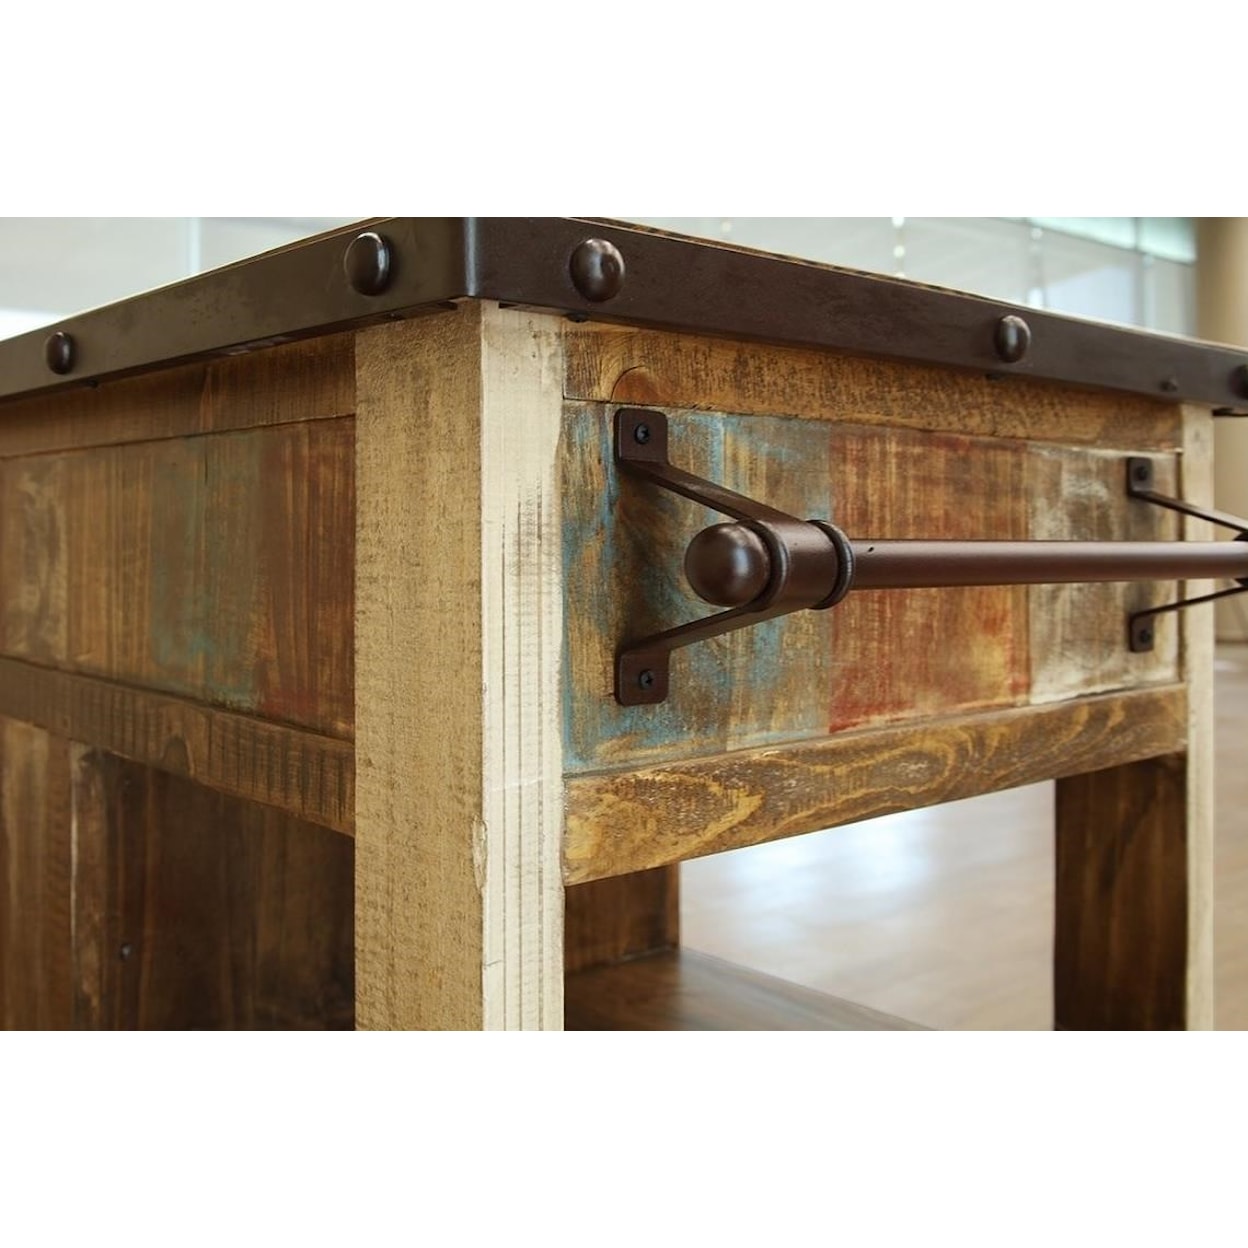 IFD International Furniture Direct Antique 963 Kitchen Island with 1 Drawer and 1 Door